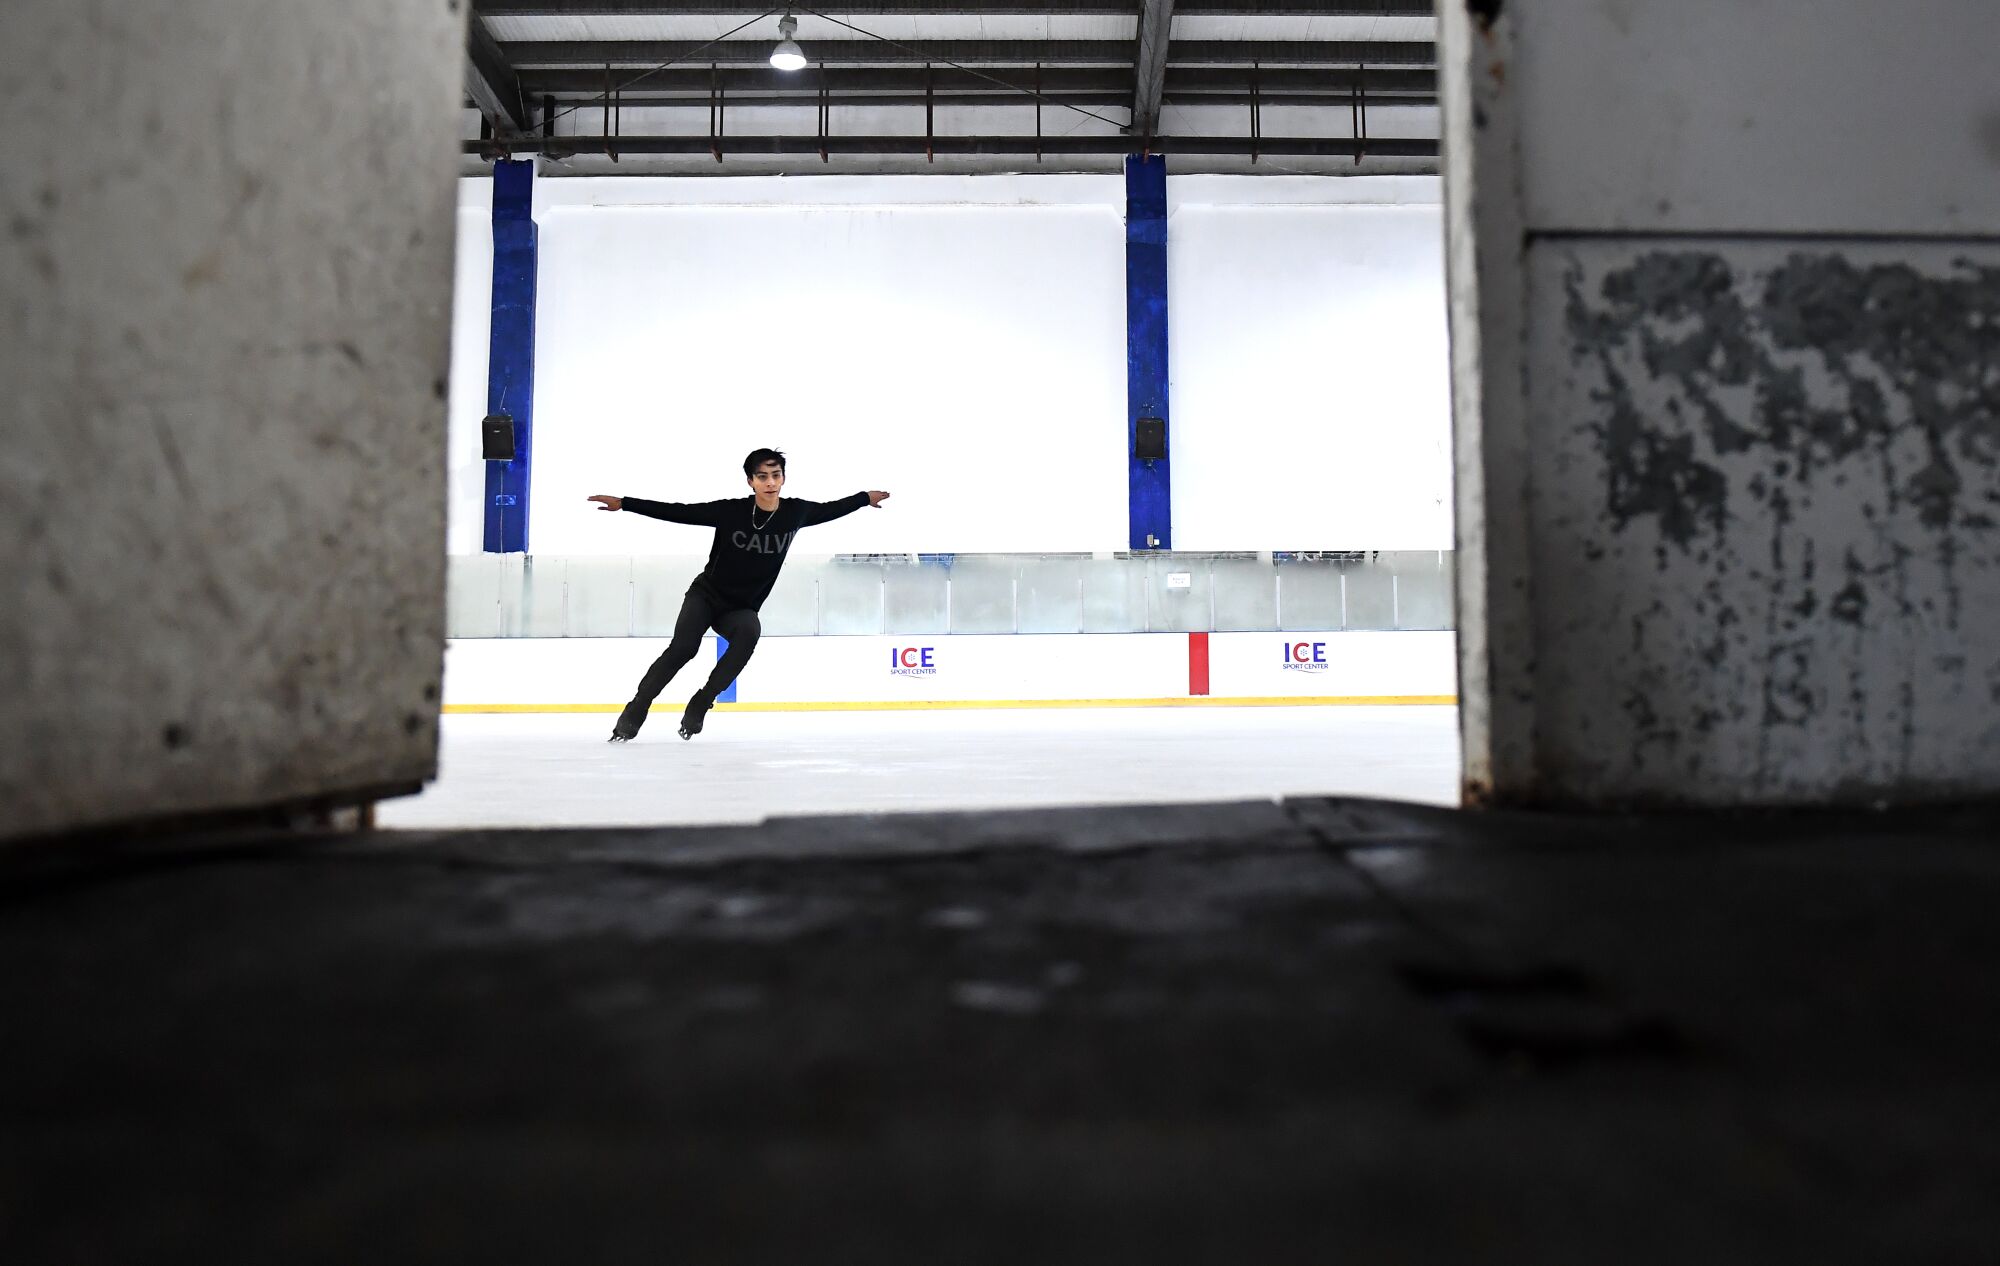 Donovan Carrillo practices at an ice rink in a shopping mall in León, Mexico.